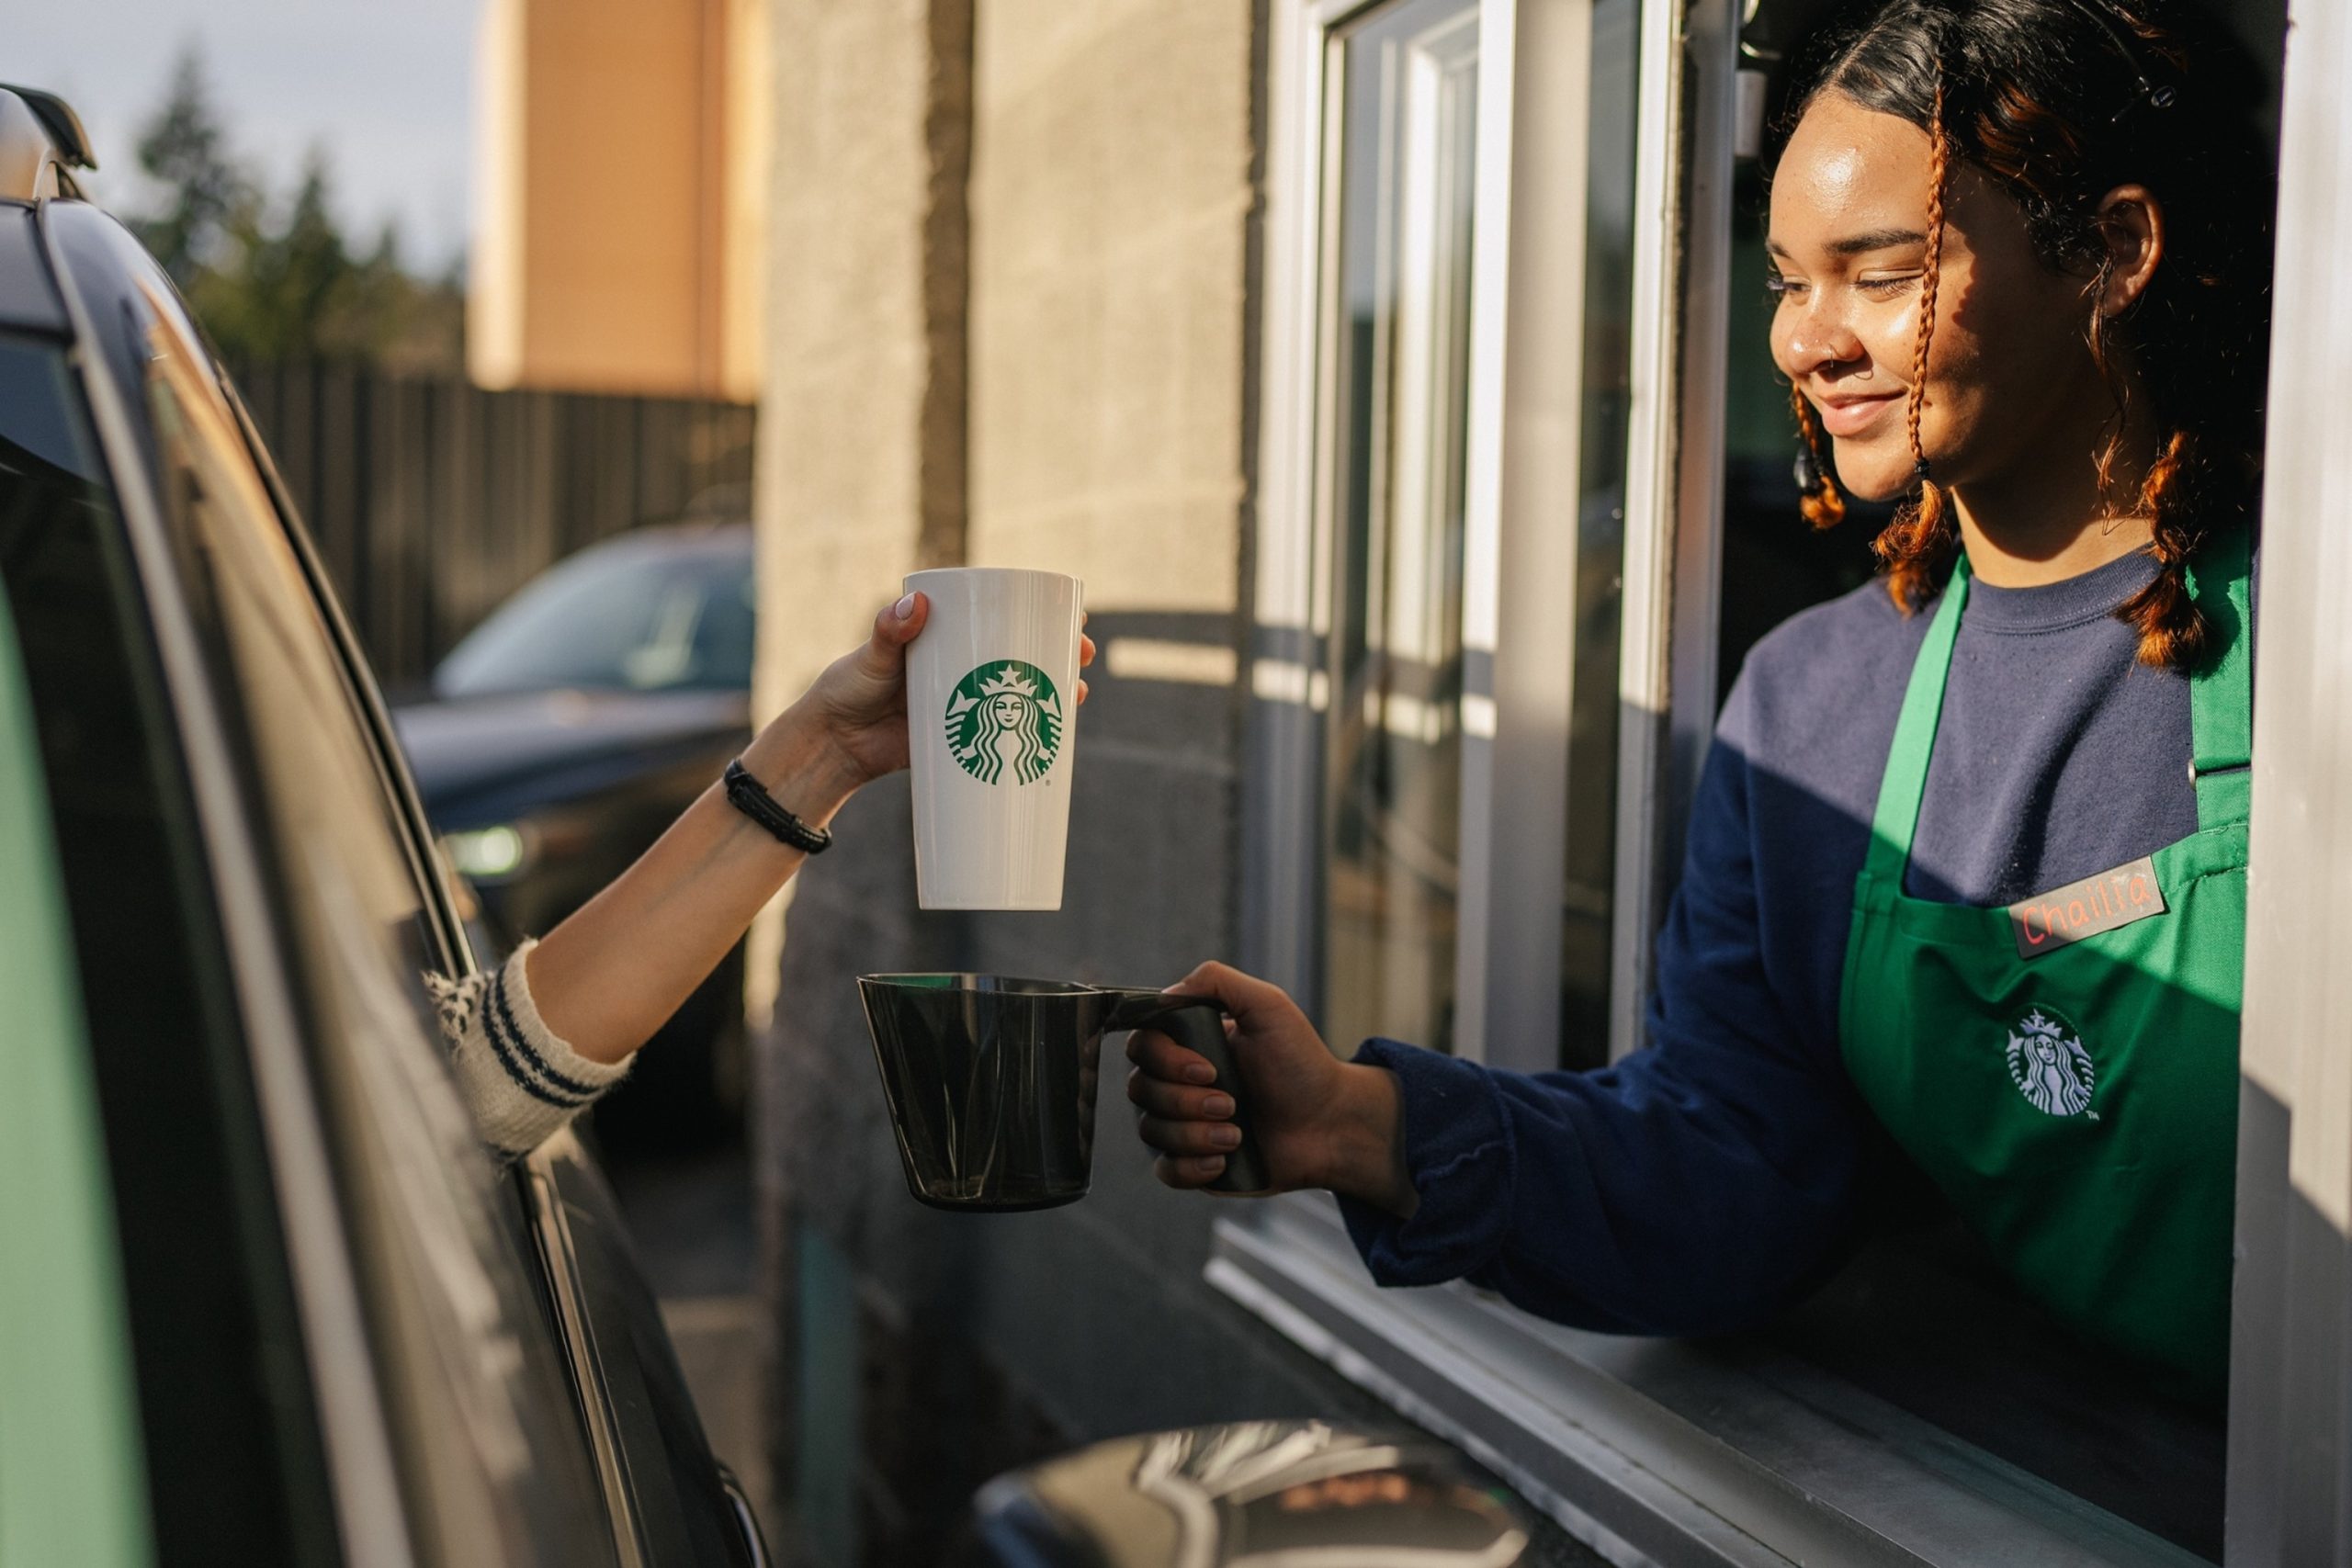 Starbucks introduces new reusable cup option for mobile and drive-thru orders